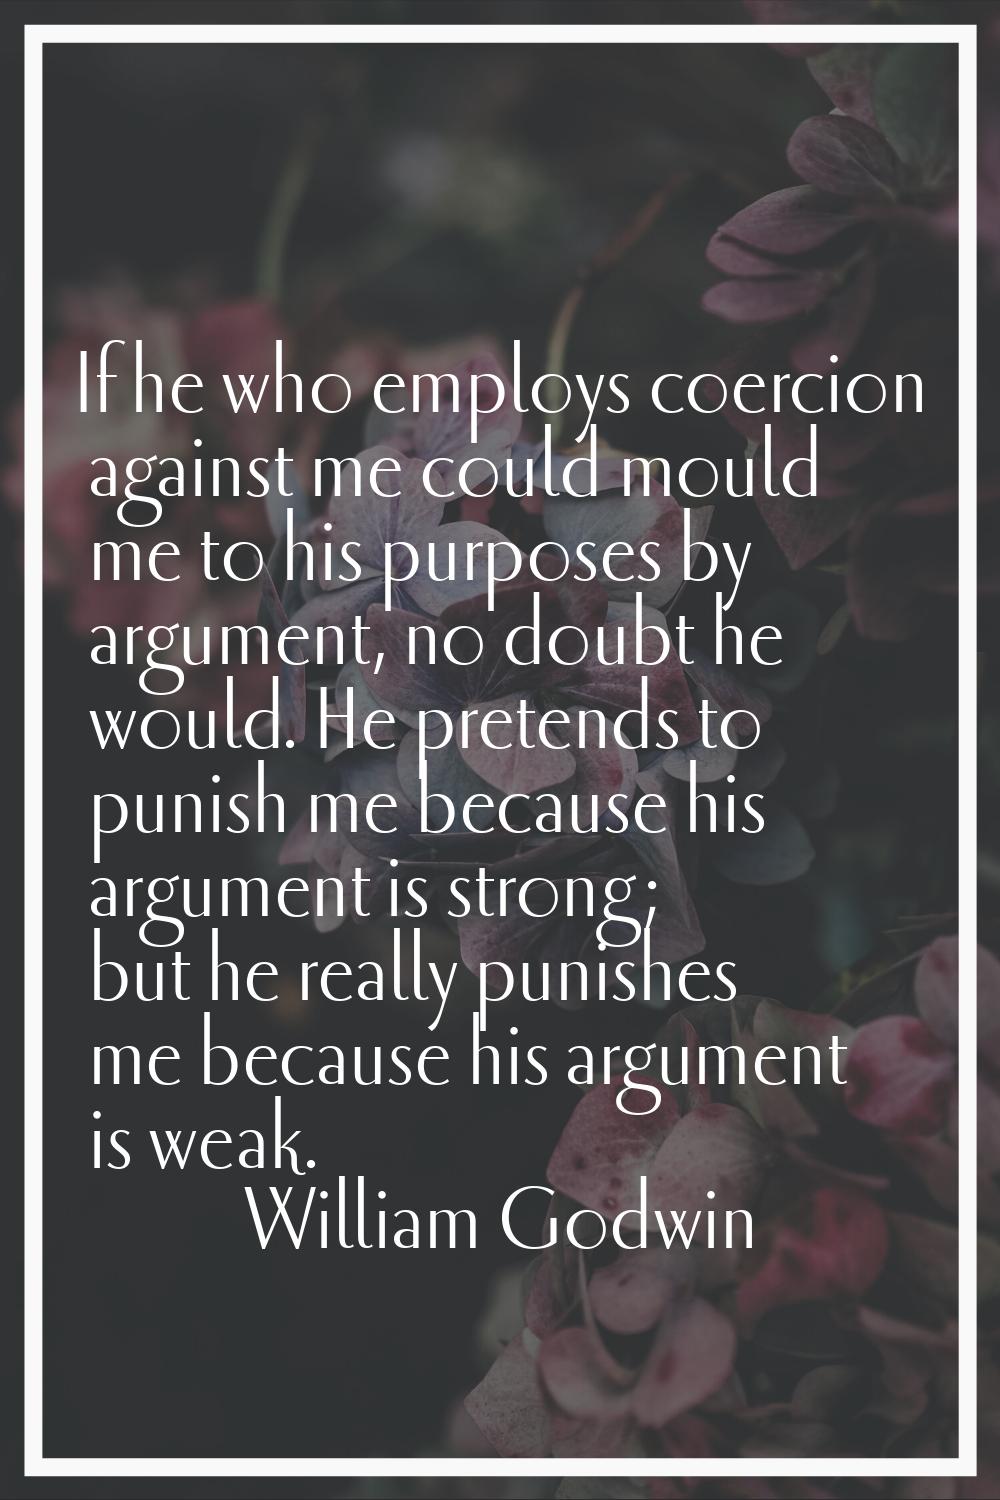 If he who employs coercion against me could mould me to his purposes by argument, no doubt he would